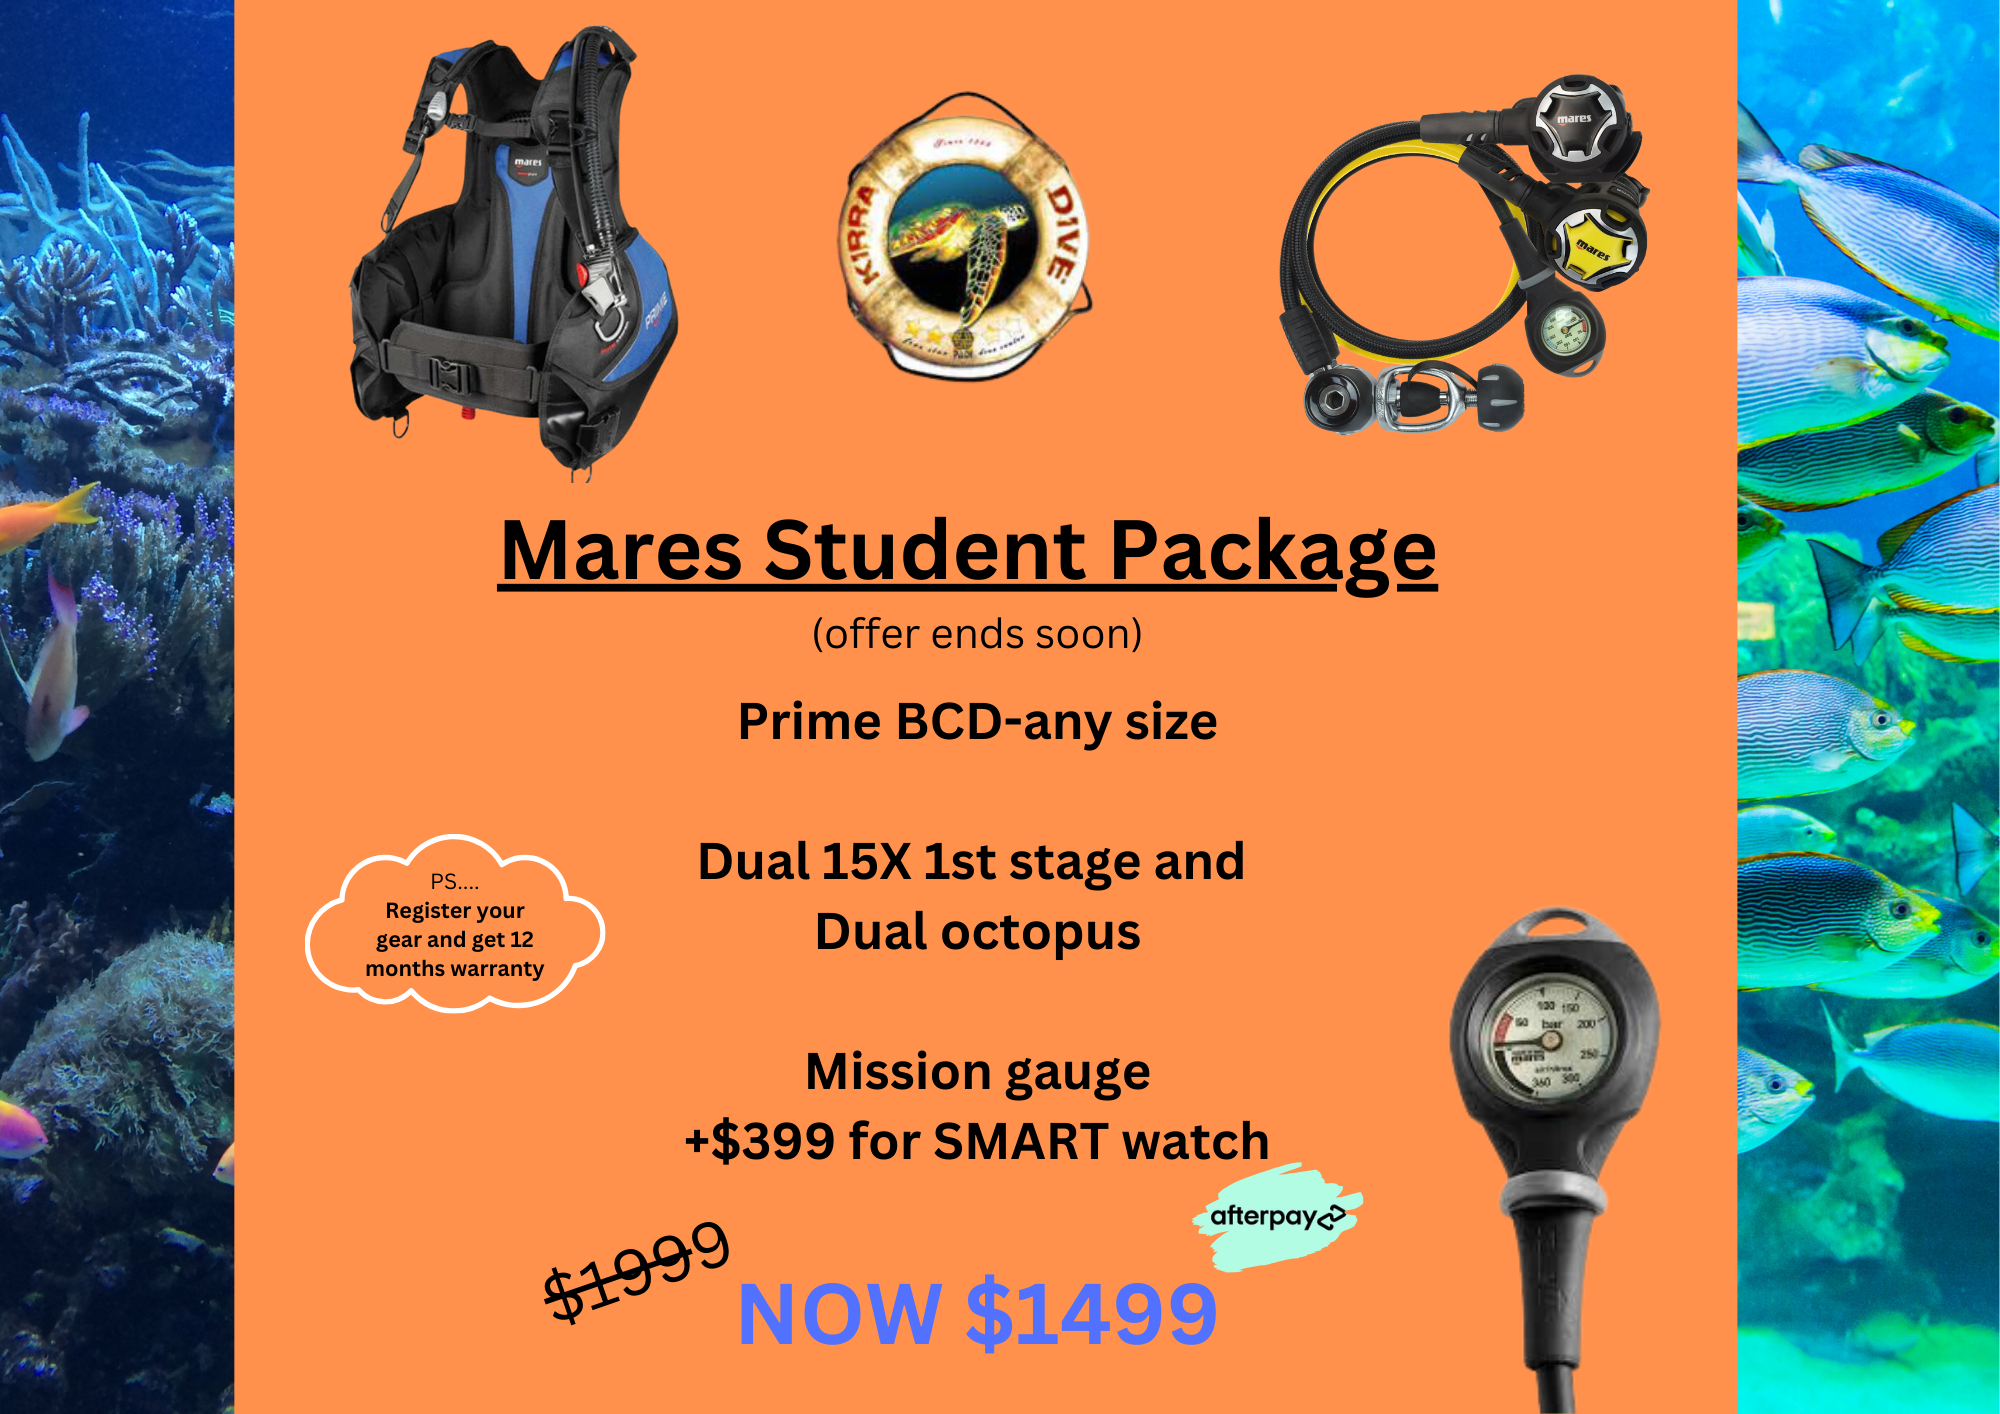 STUDENT MARES PACK - AFTERPAY AVAILABLE